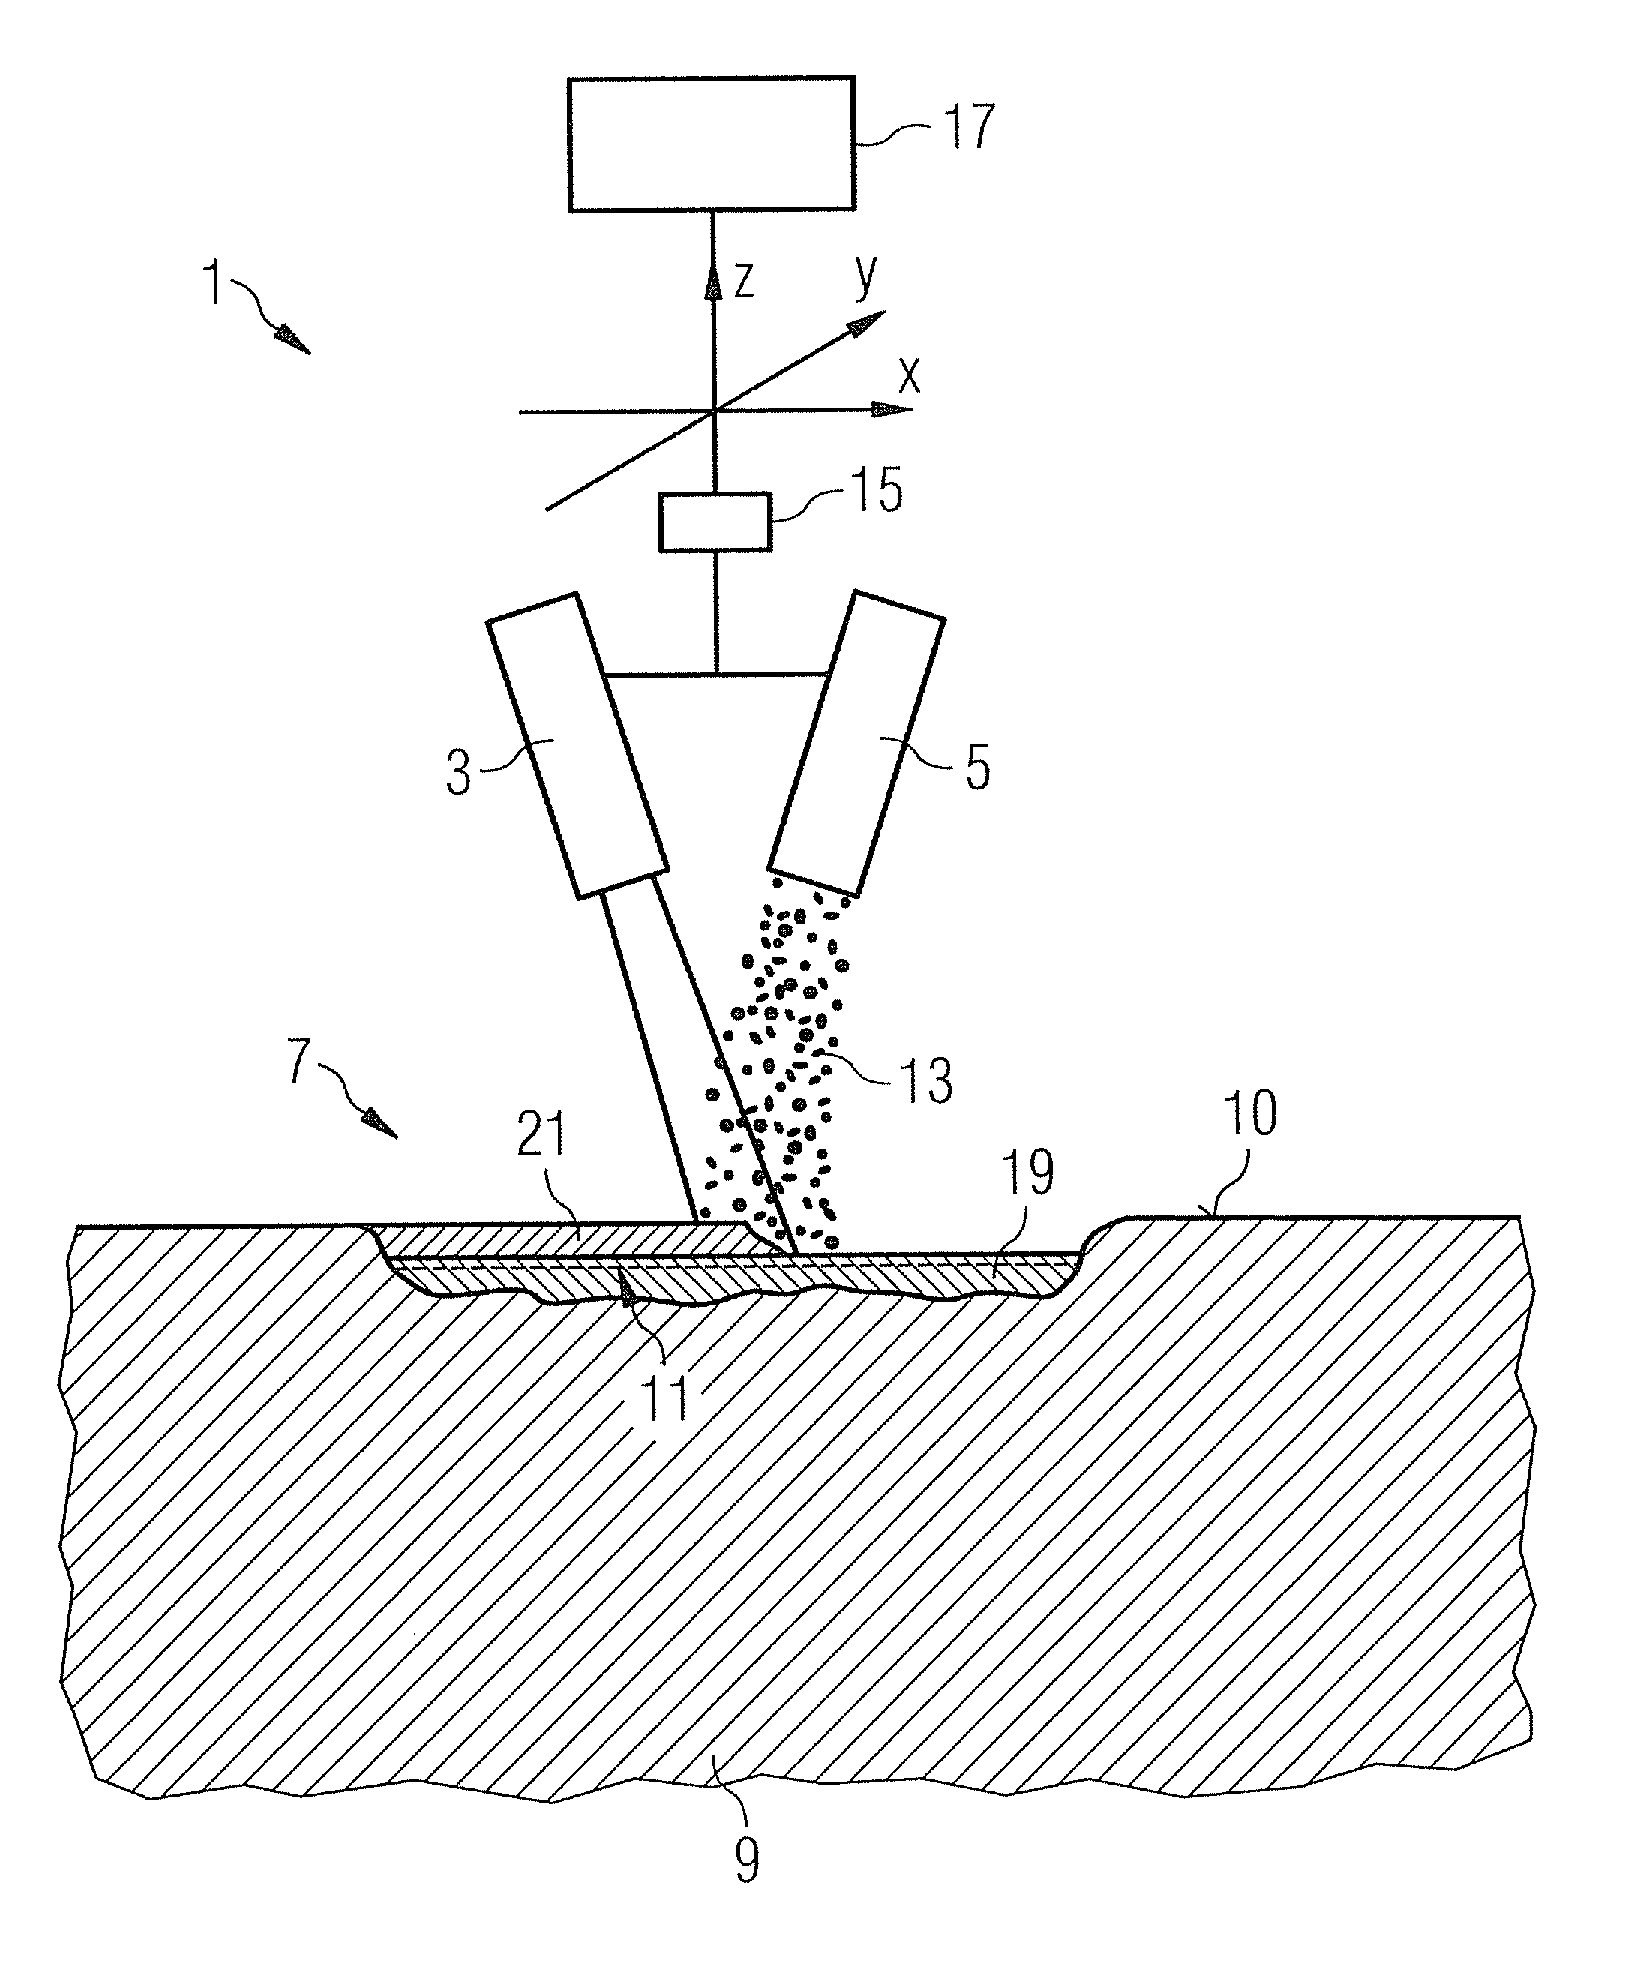 Method for welding workpieces made of highly heat-resistant superalloys, including a particular mass feed rate of the welding filler material